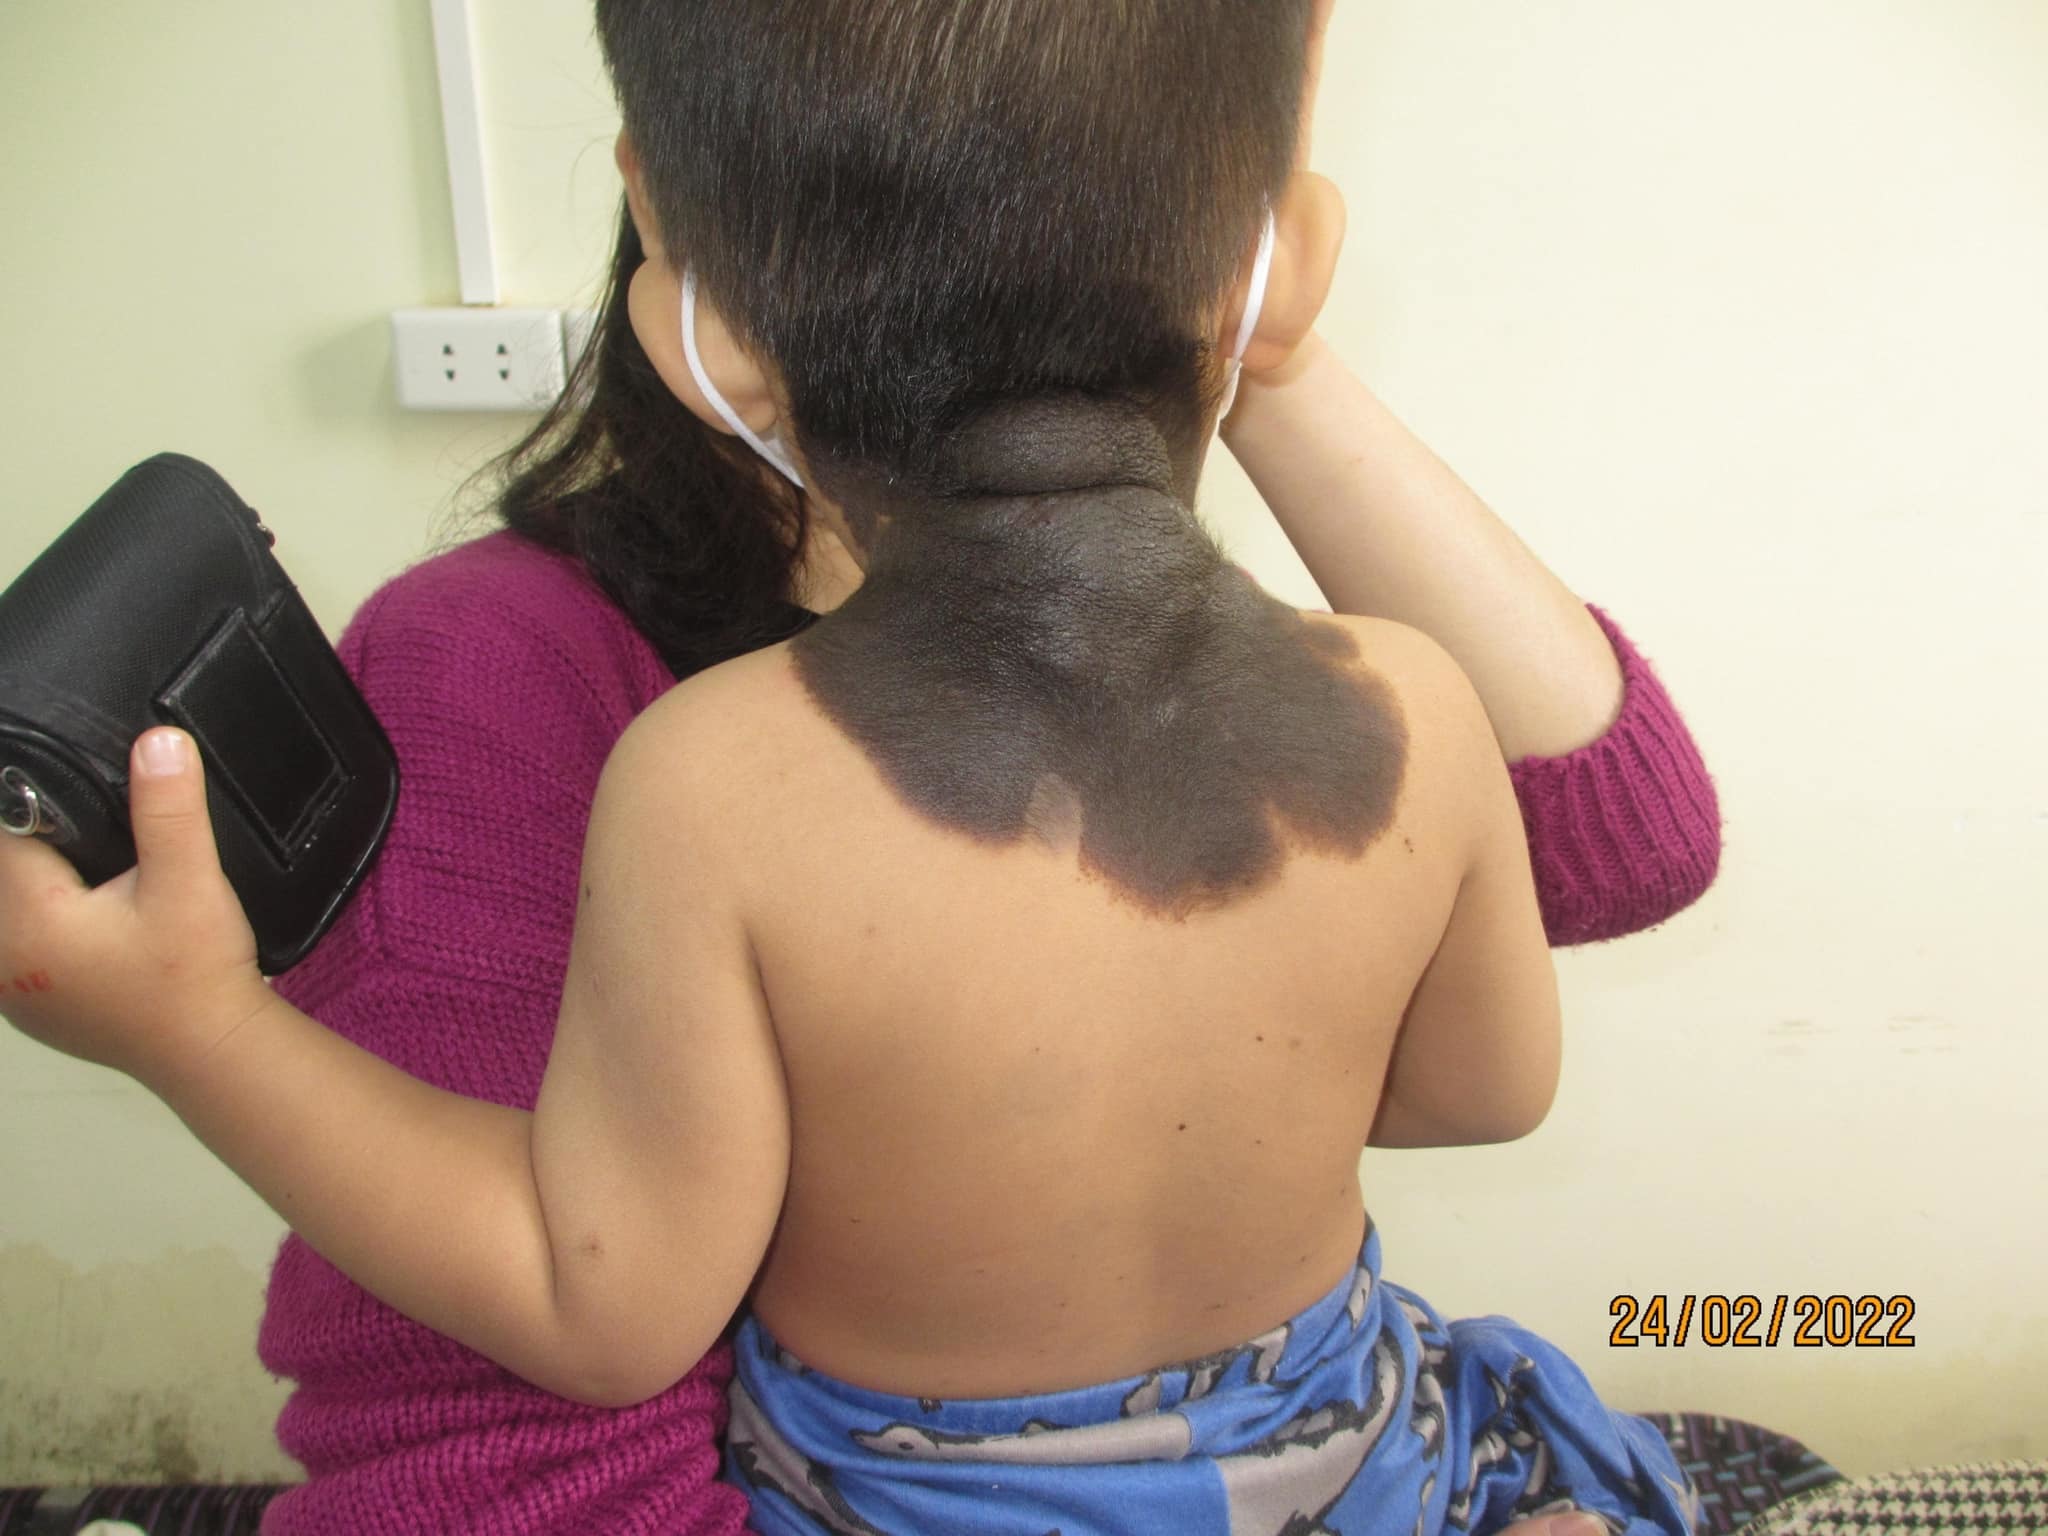 A 2-year-old boy has a black “big” birthmark that fills the back of his neck, the doctor points out the cause